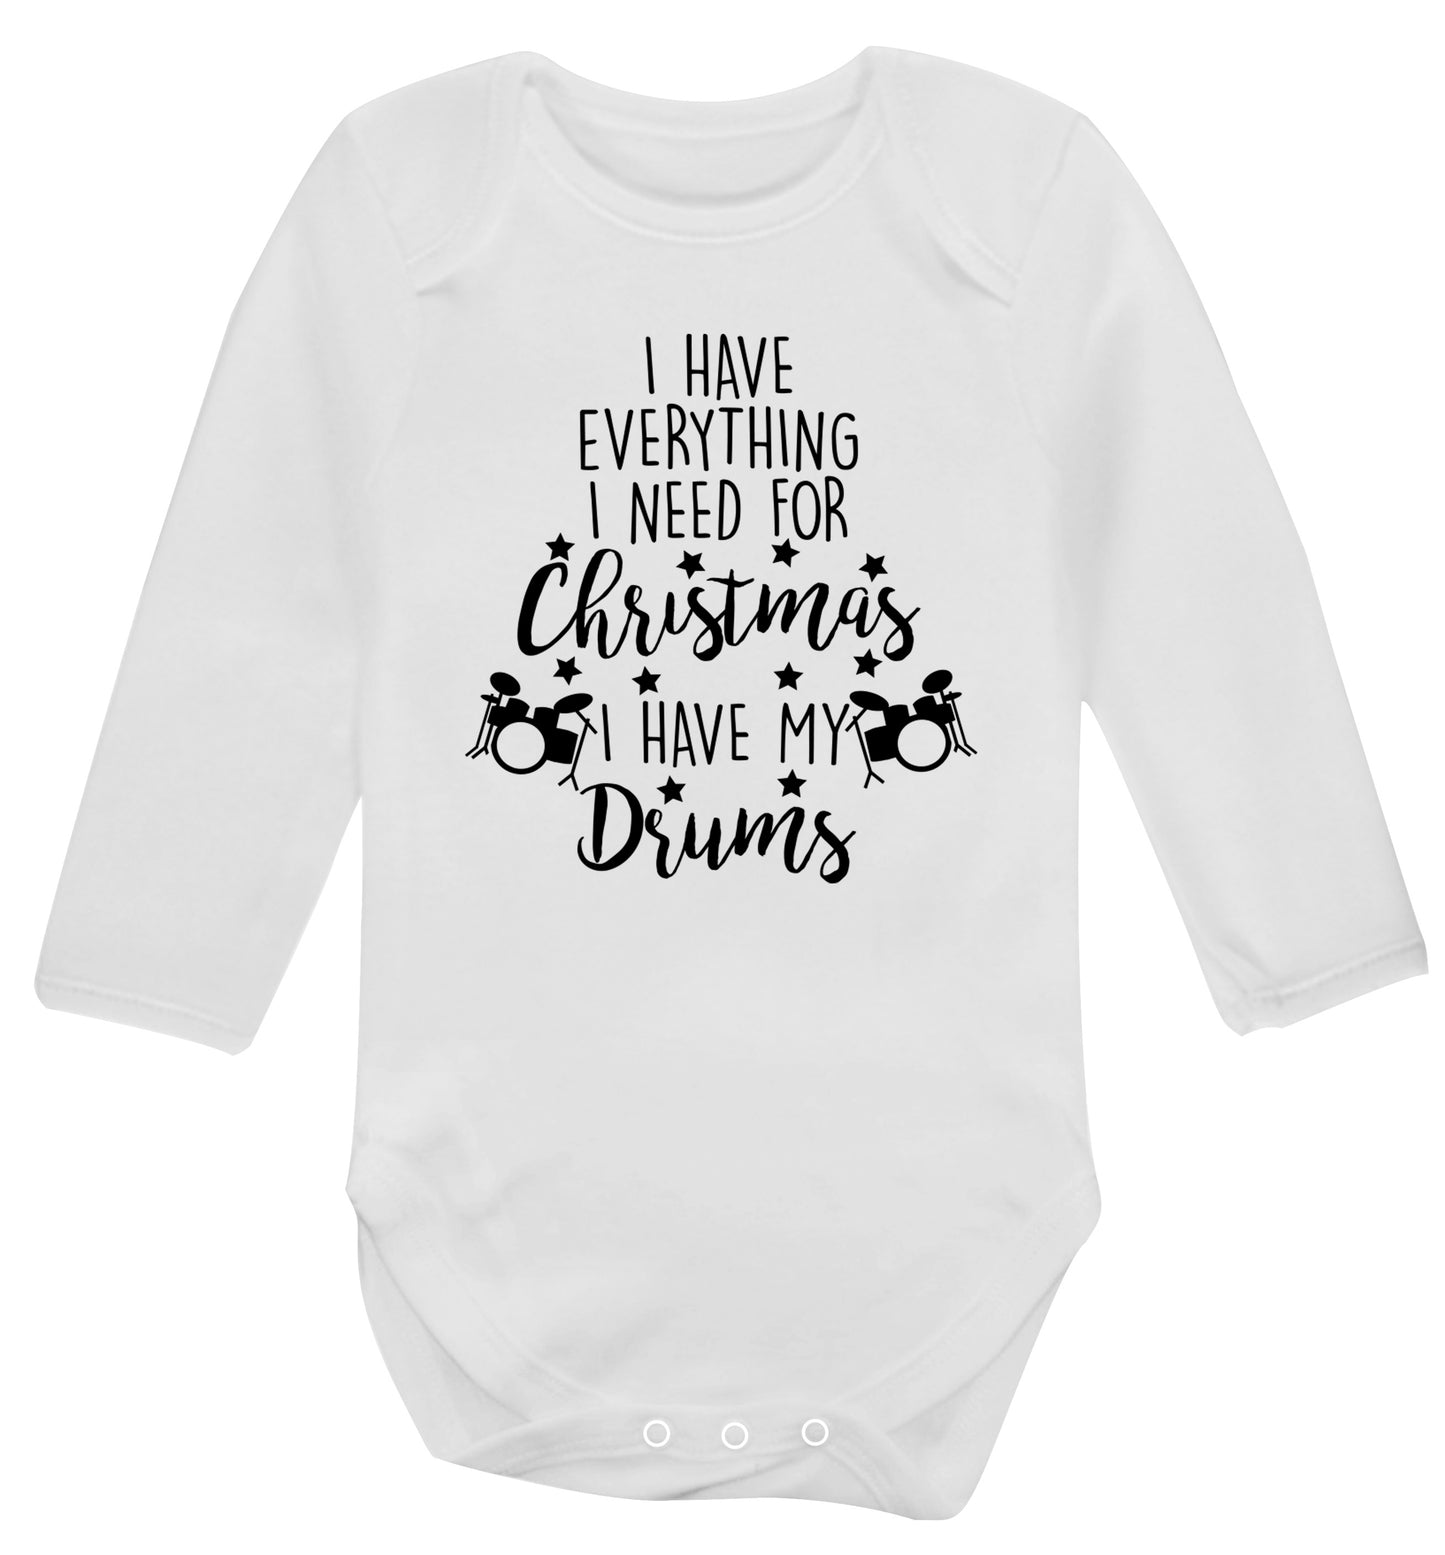 I have everything I need for Christmas I have my drums! Baby Vest long sleeved white 6-12 months